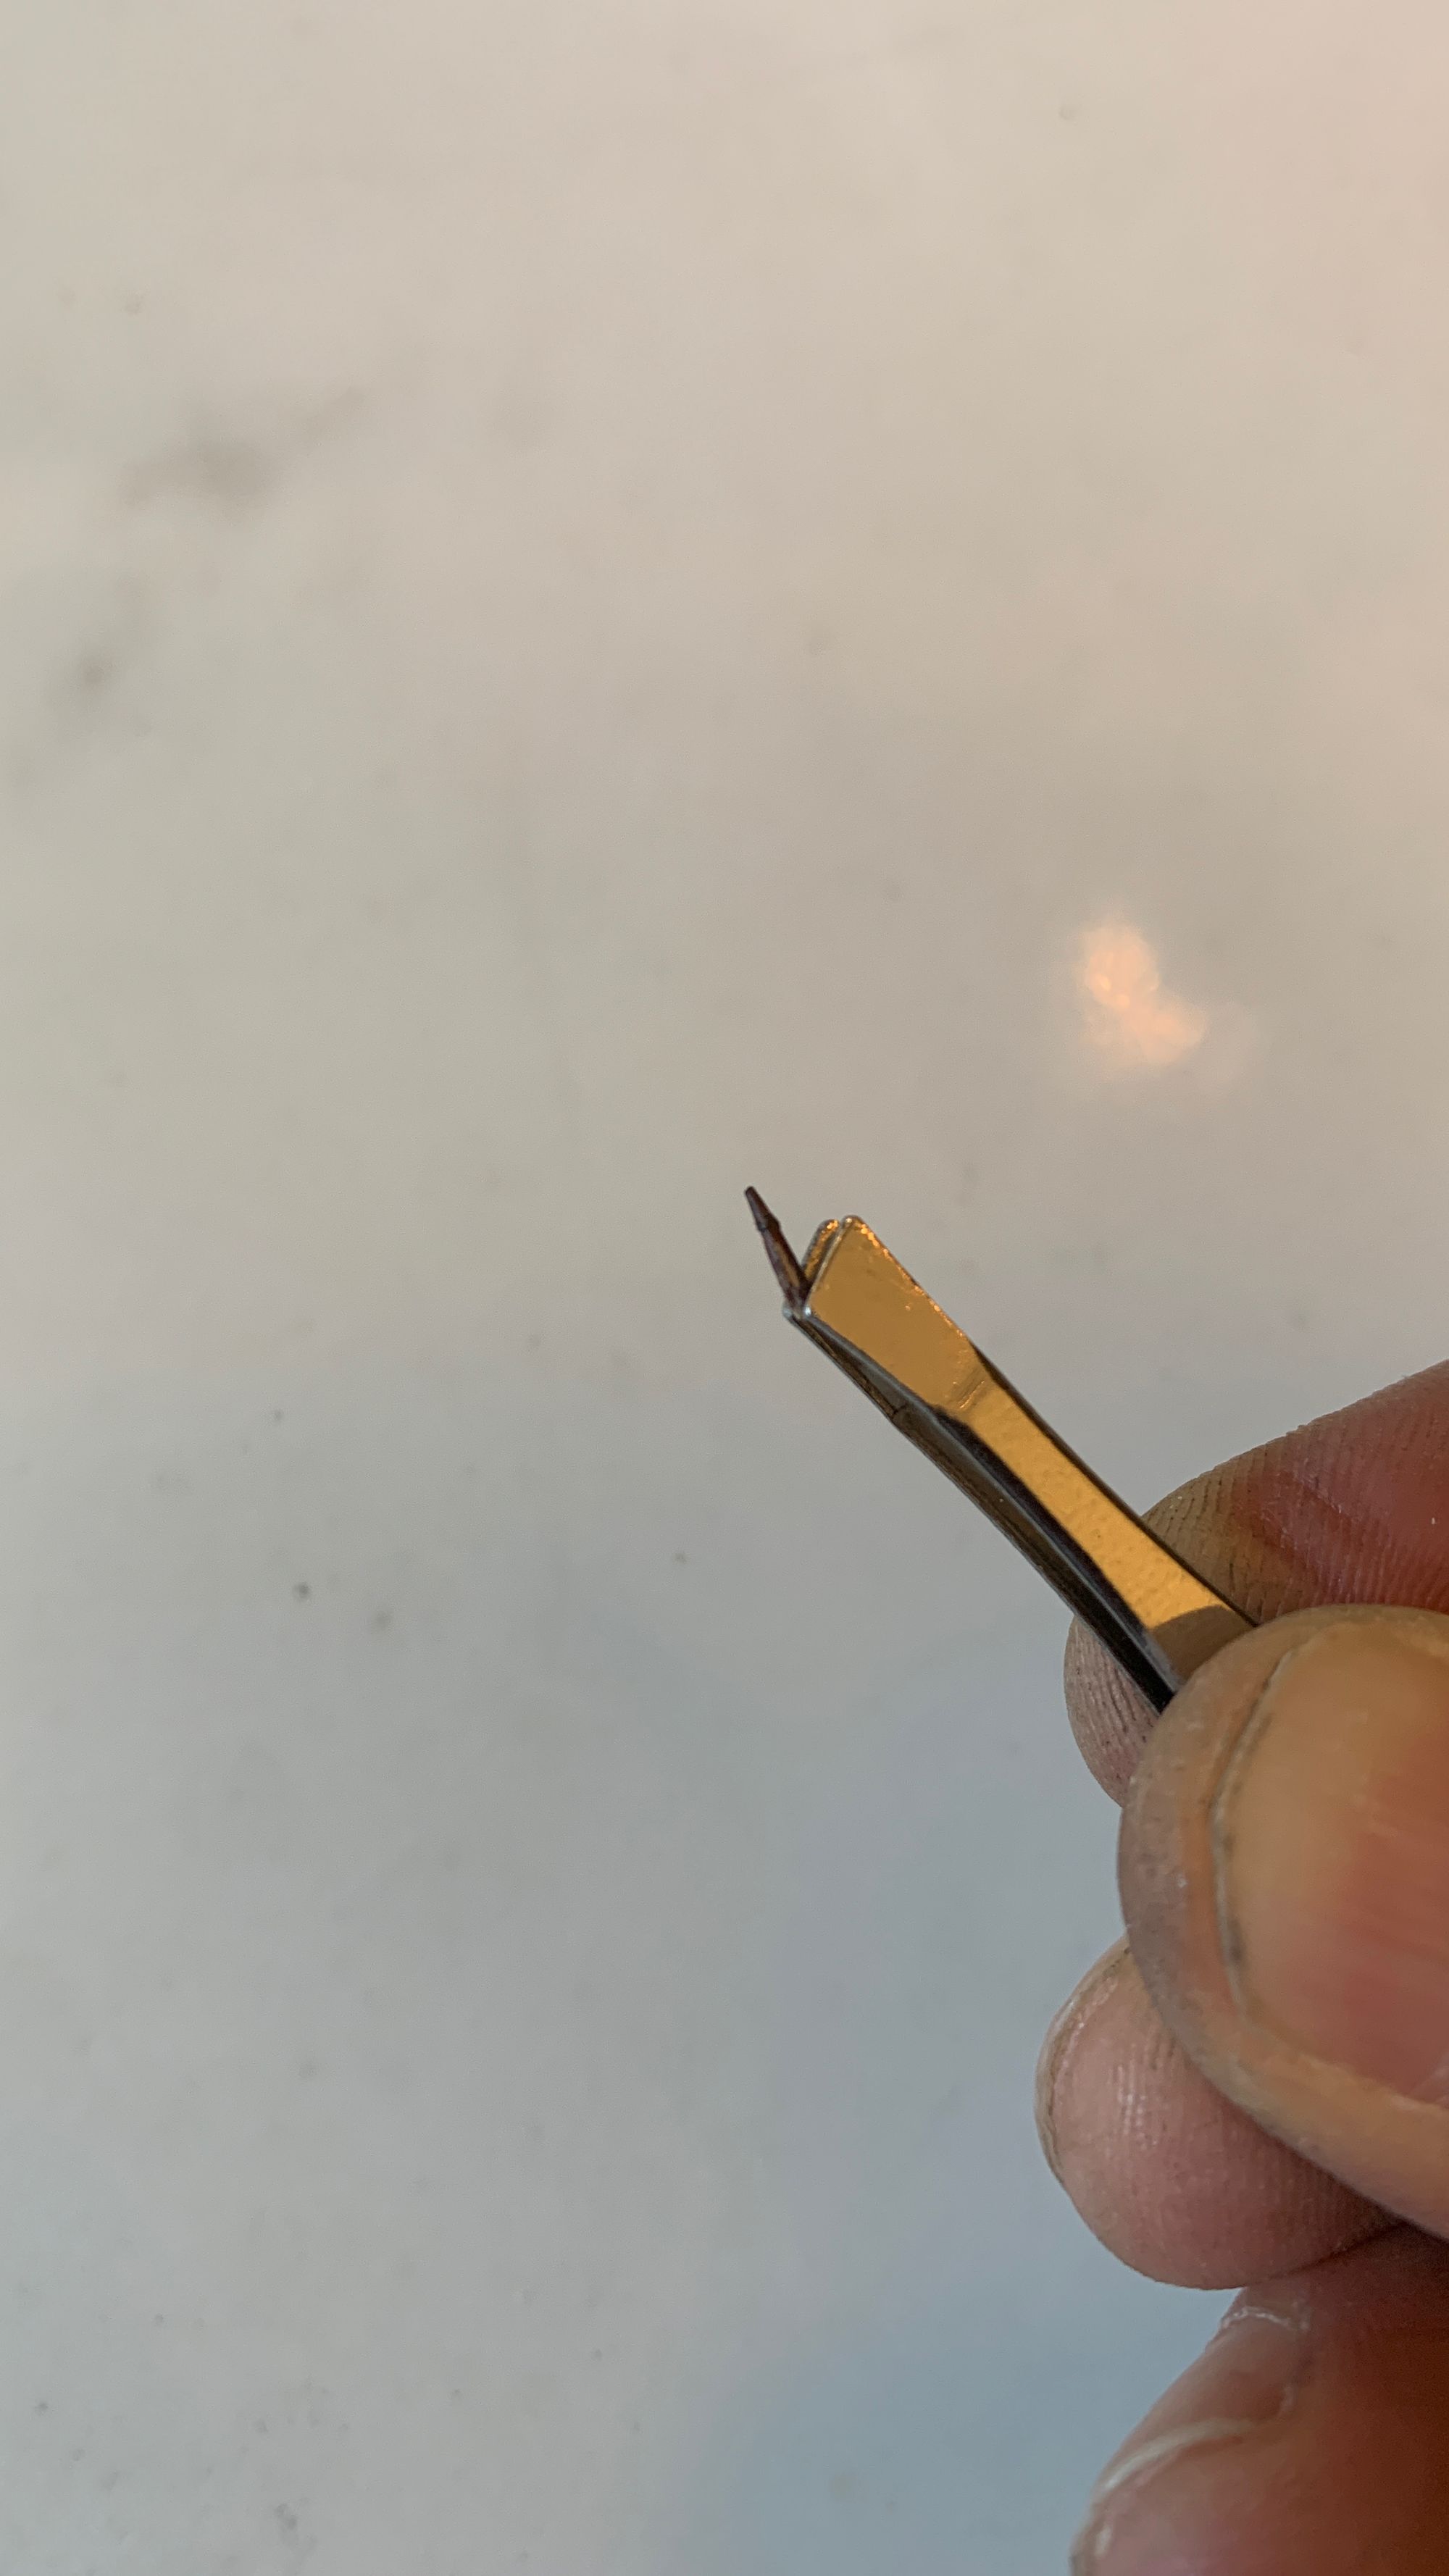 A tiny sharp shard of metal measuring only a few millimeters held in a pair of tweezers.